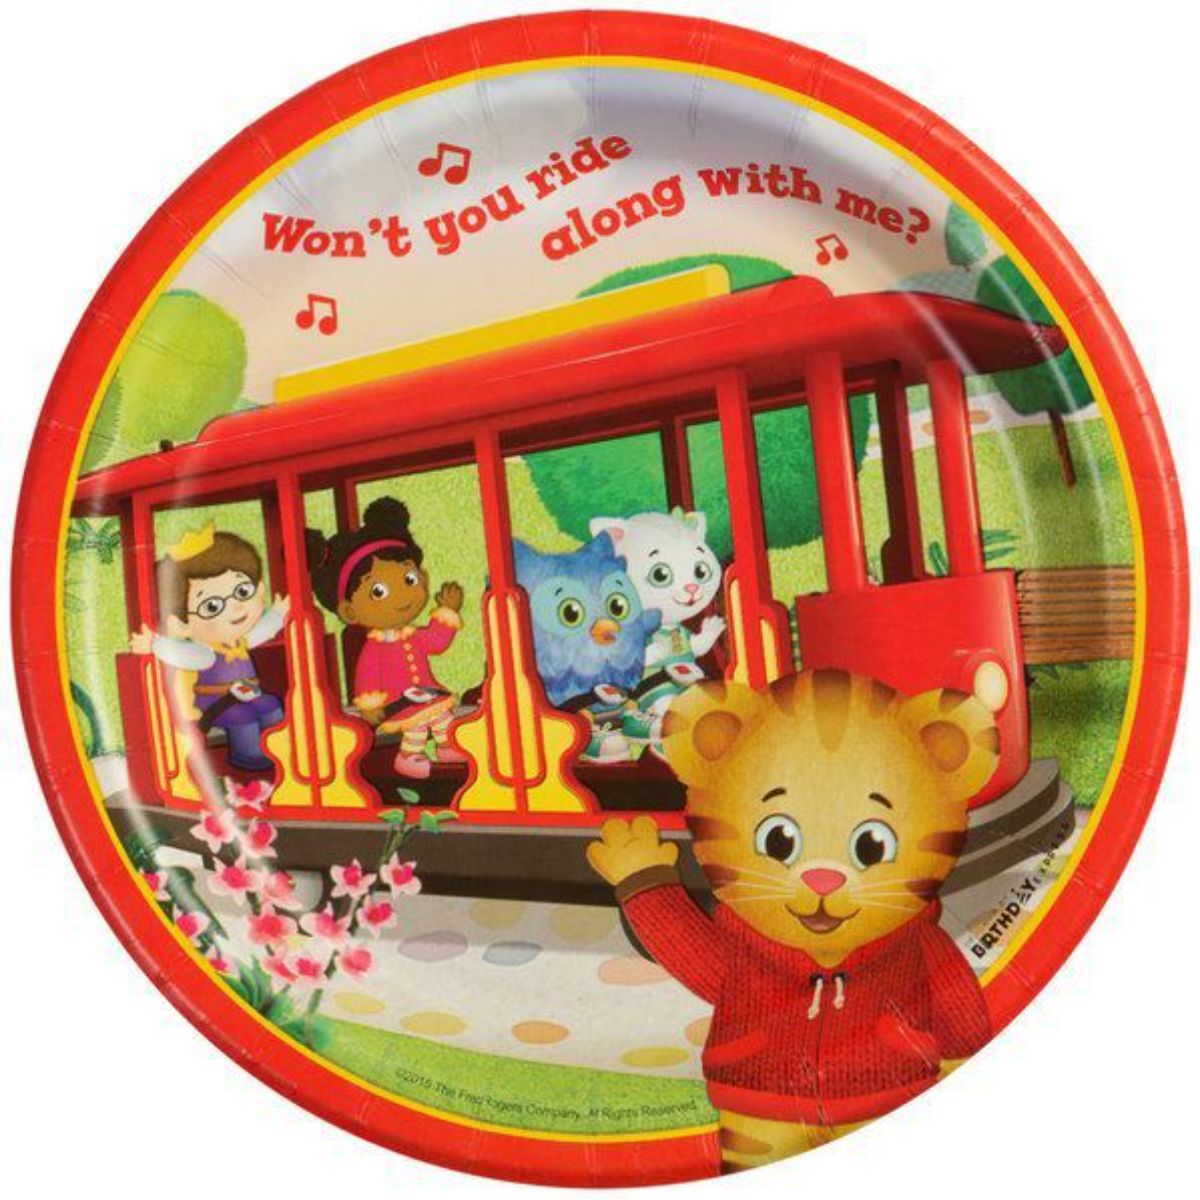 Pack of 8 Red and Green Daniel Tiger's Neighborhood Disposable Paper Dessert Plates 6" - image 1 of 2